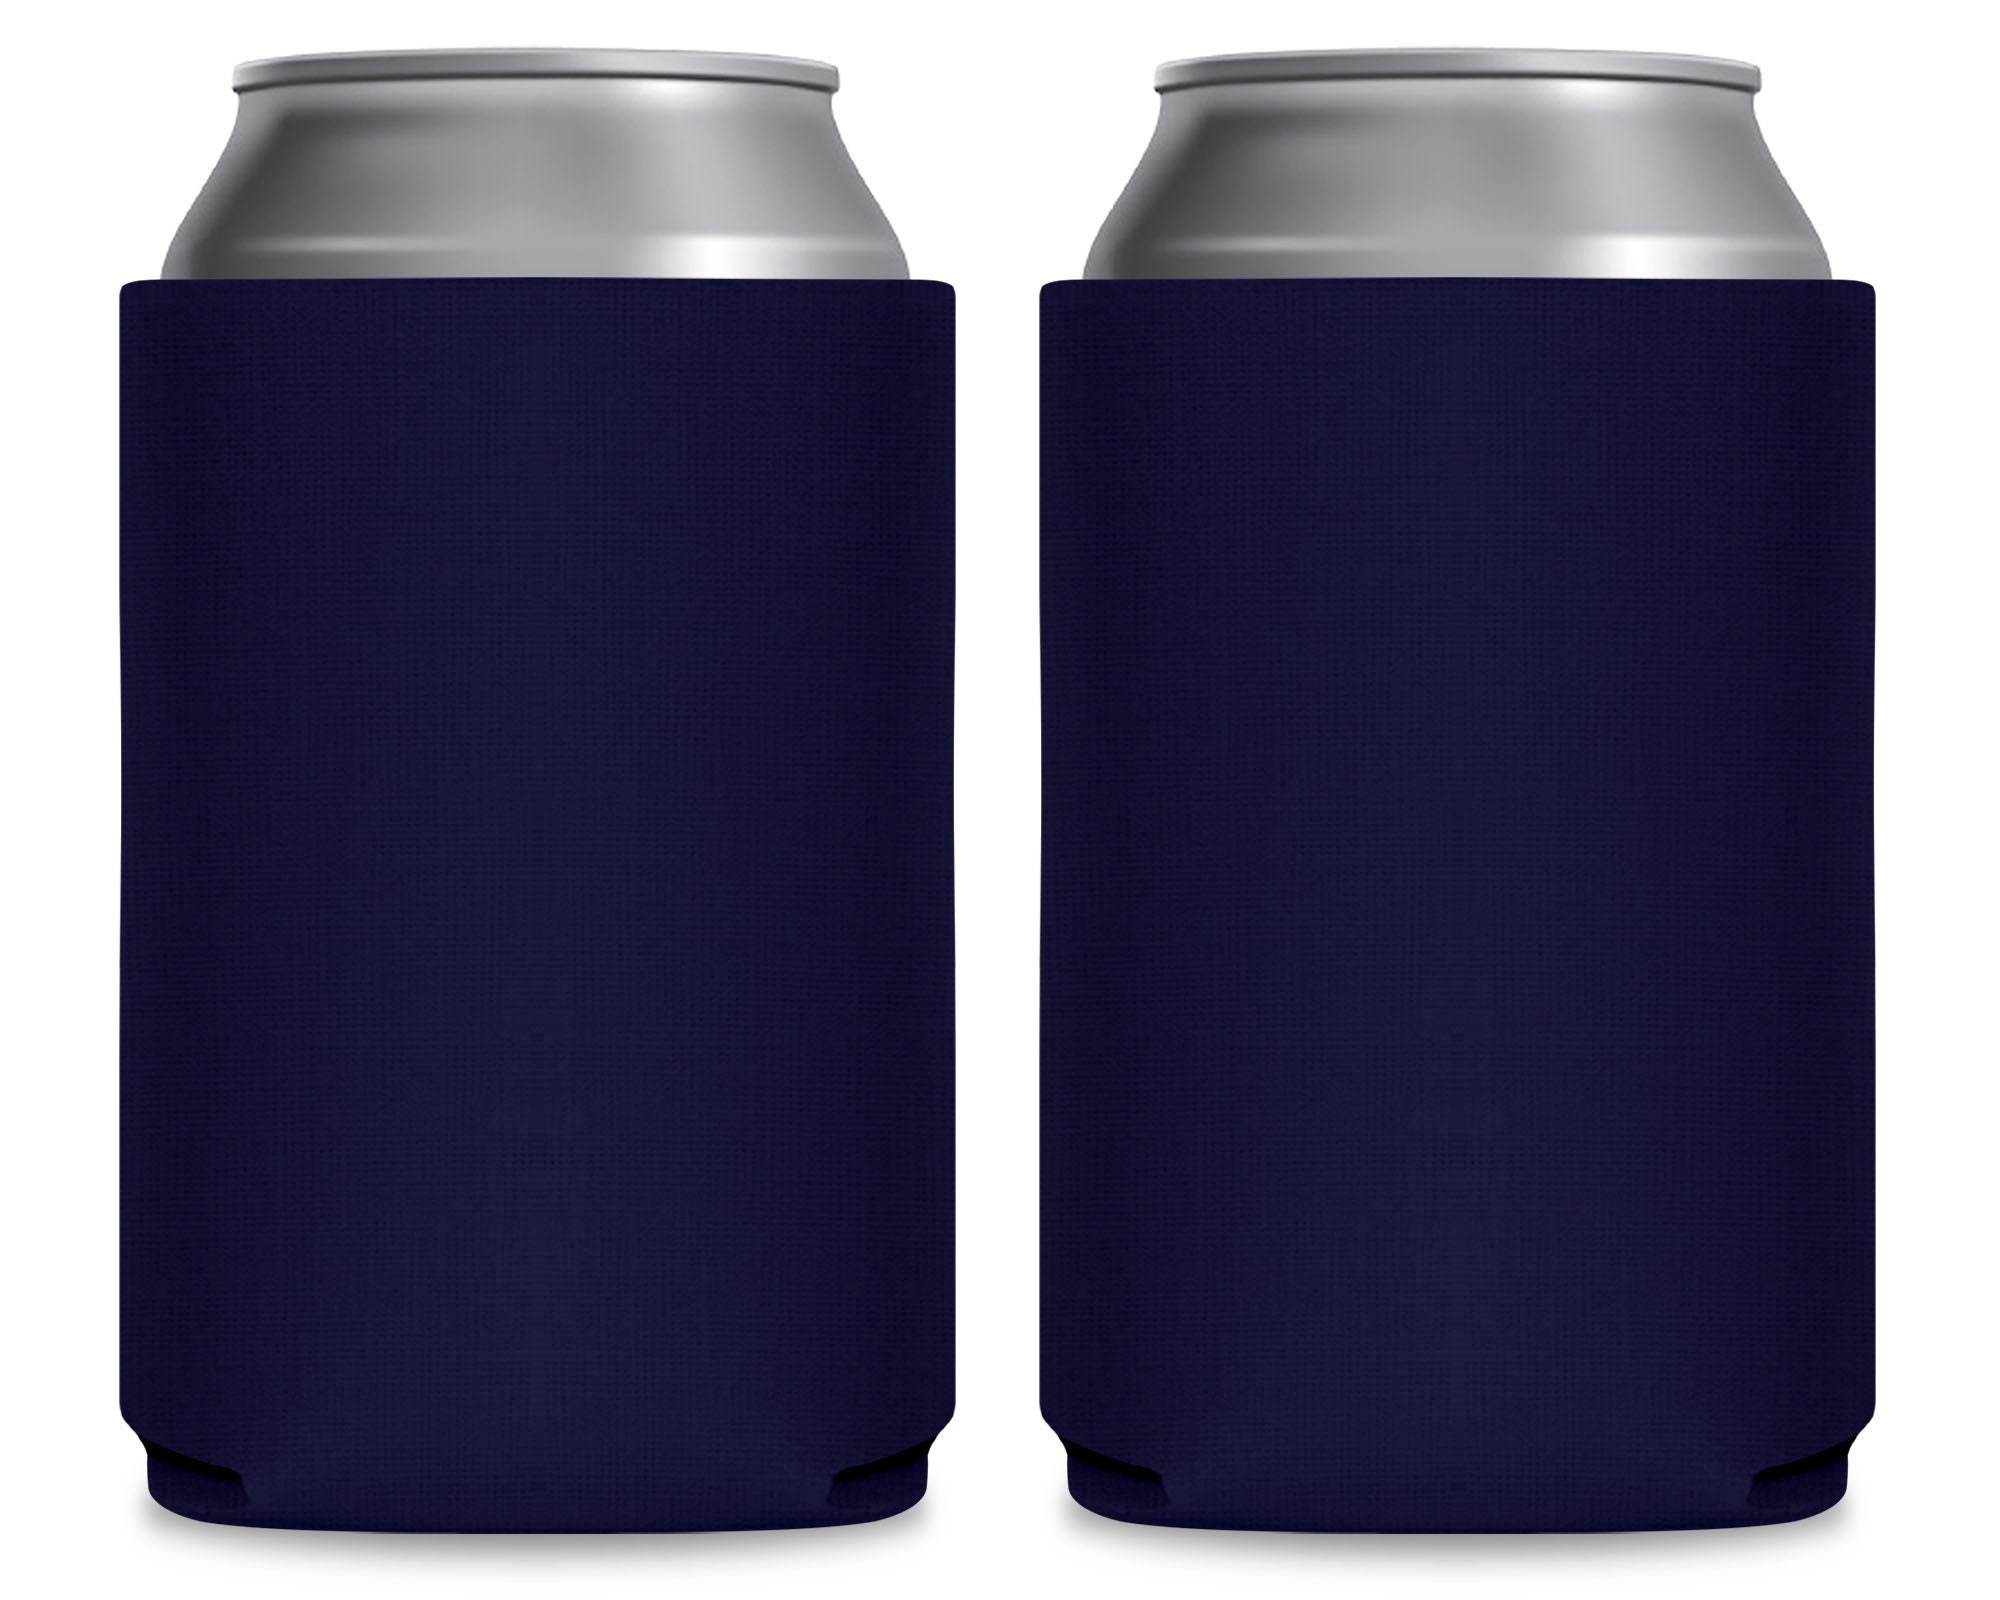 Printed Can Koozie | Just Here For Beer Inspired Design | Corn Feature |  Blue | Collapsible Foam Can Cooler | Beer Lovers